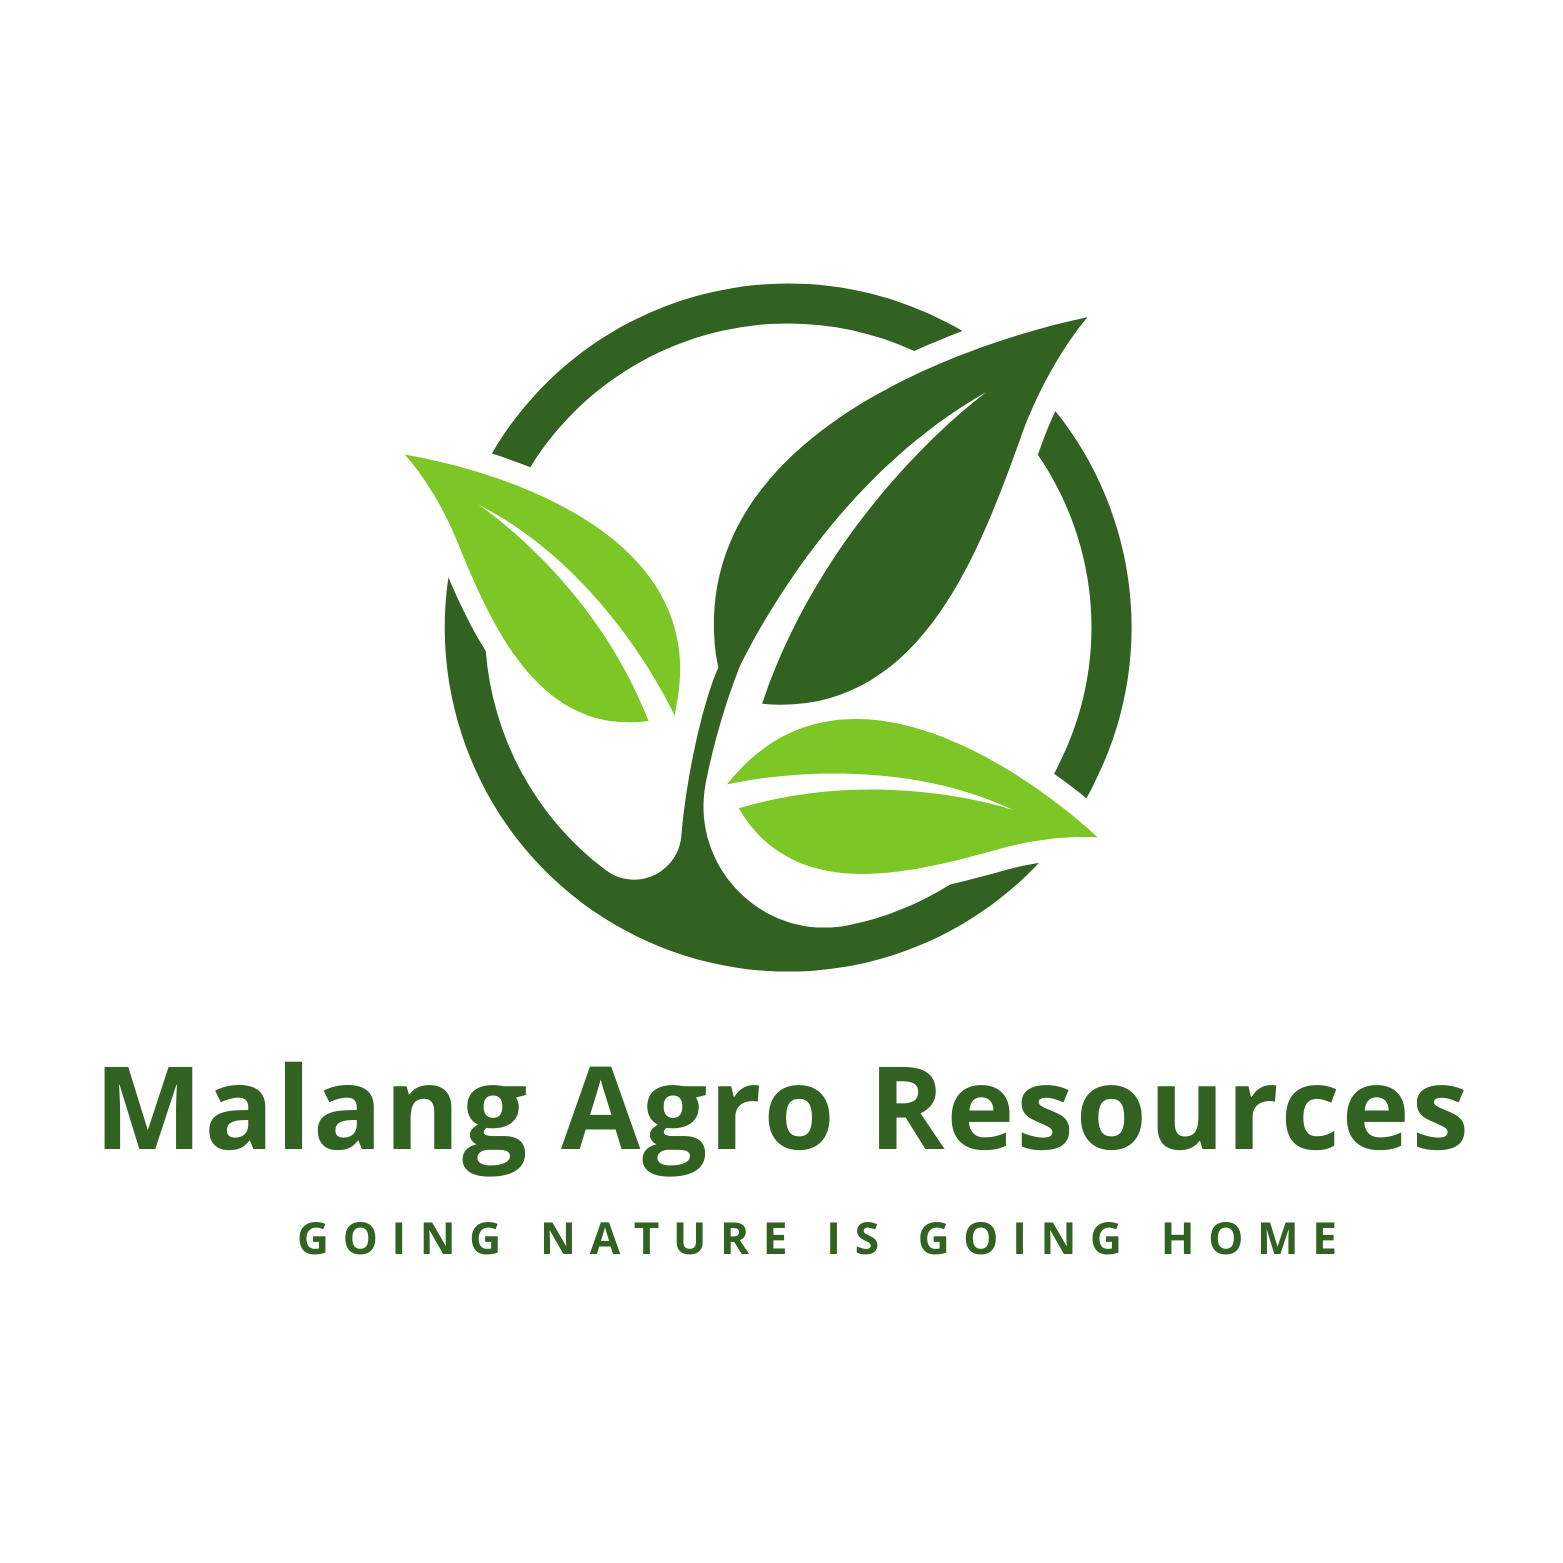 PT Malang Agro Resources